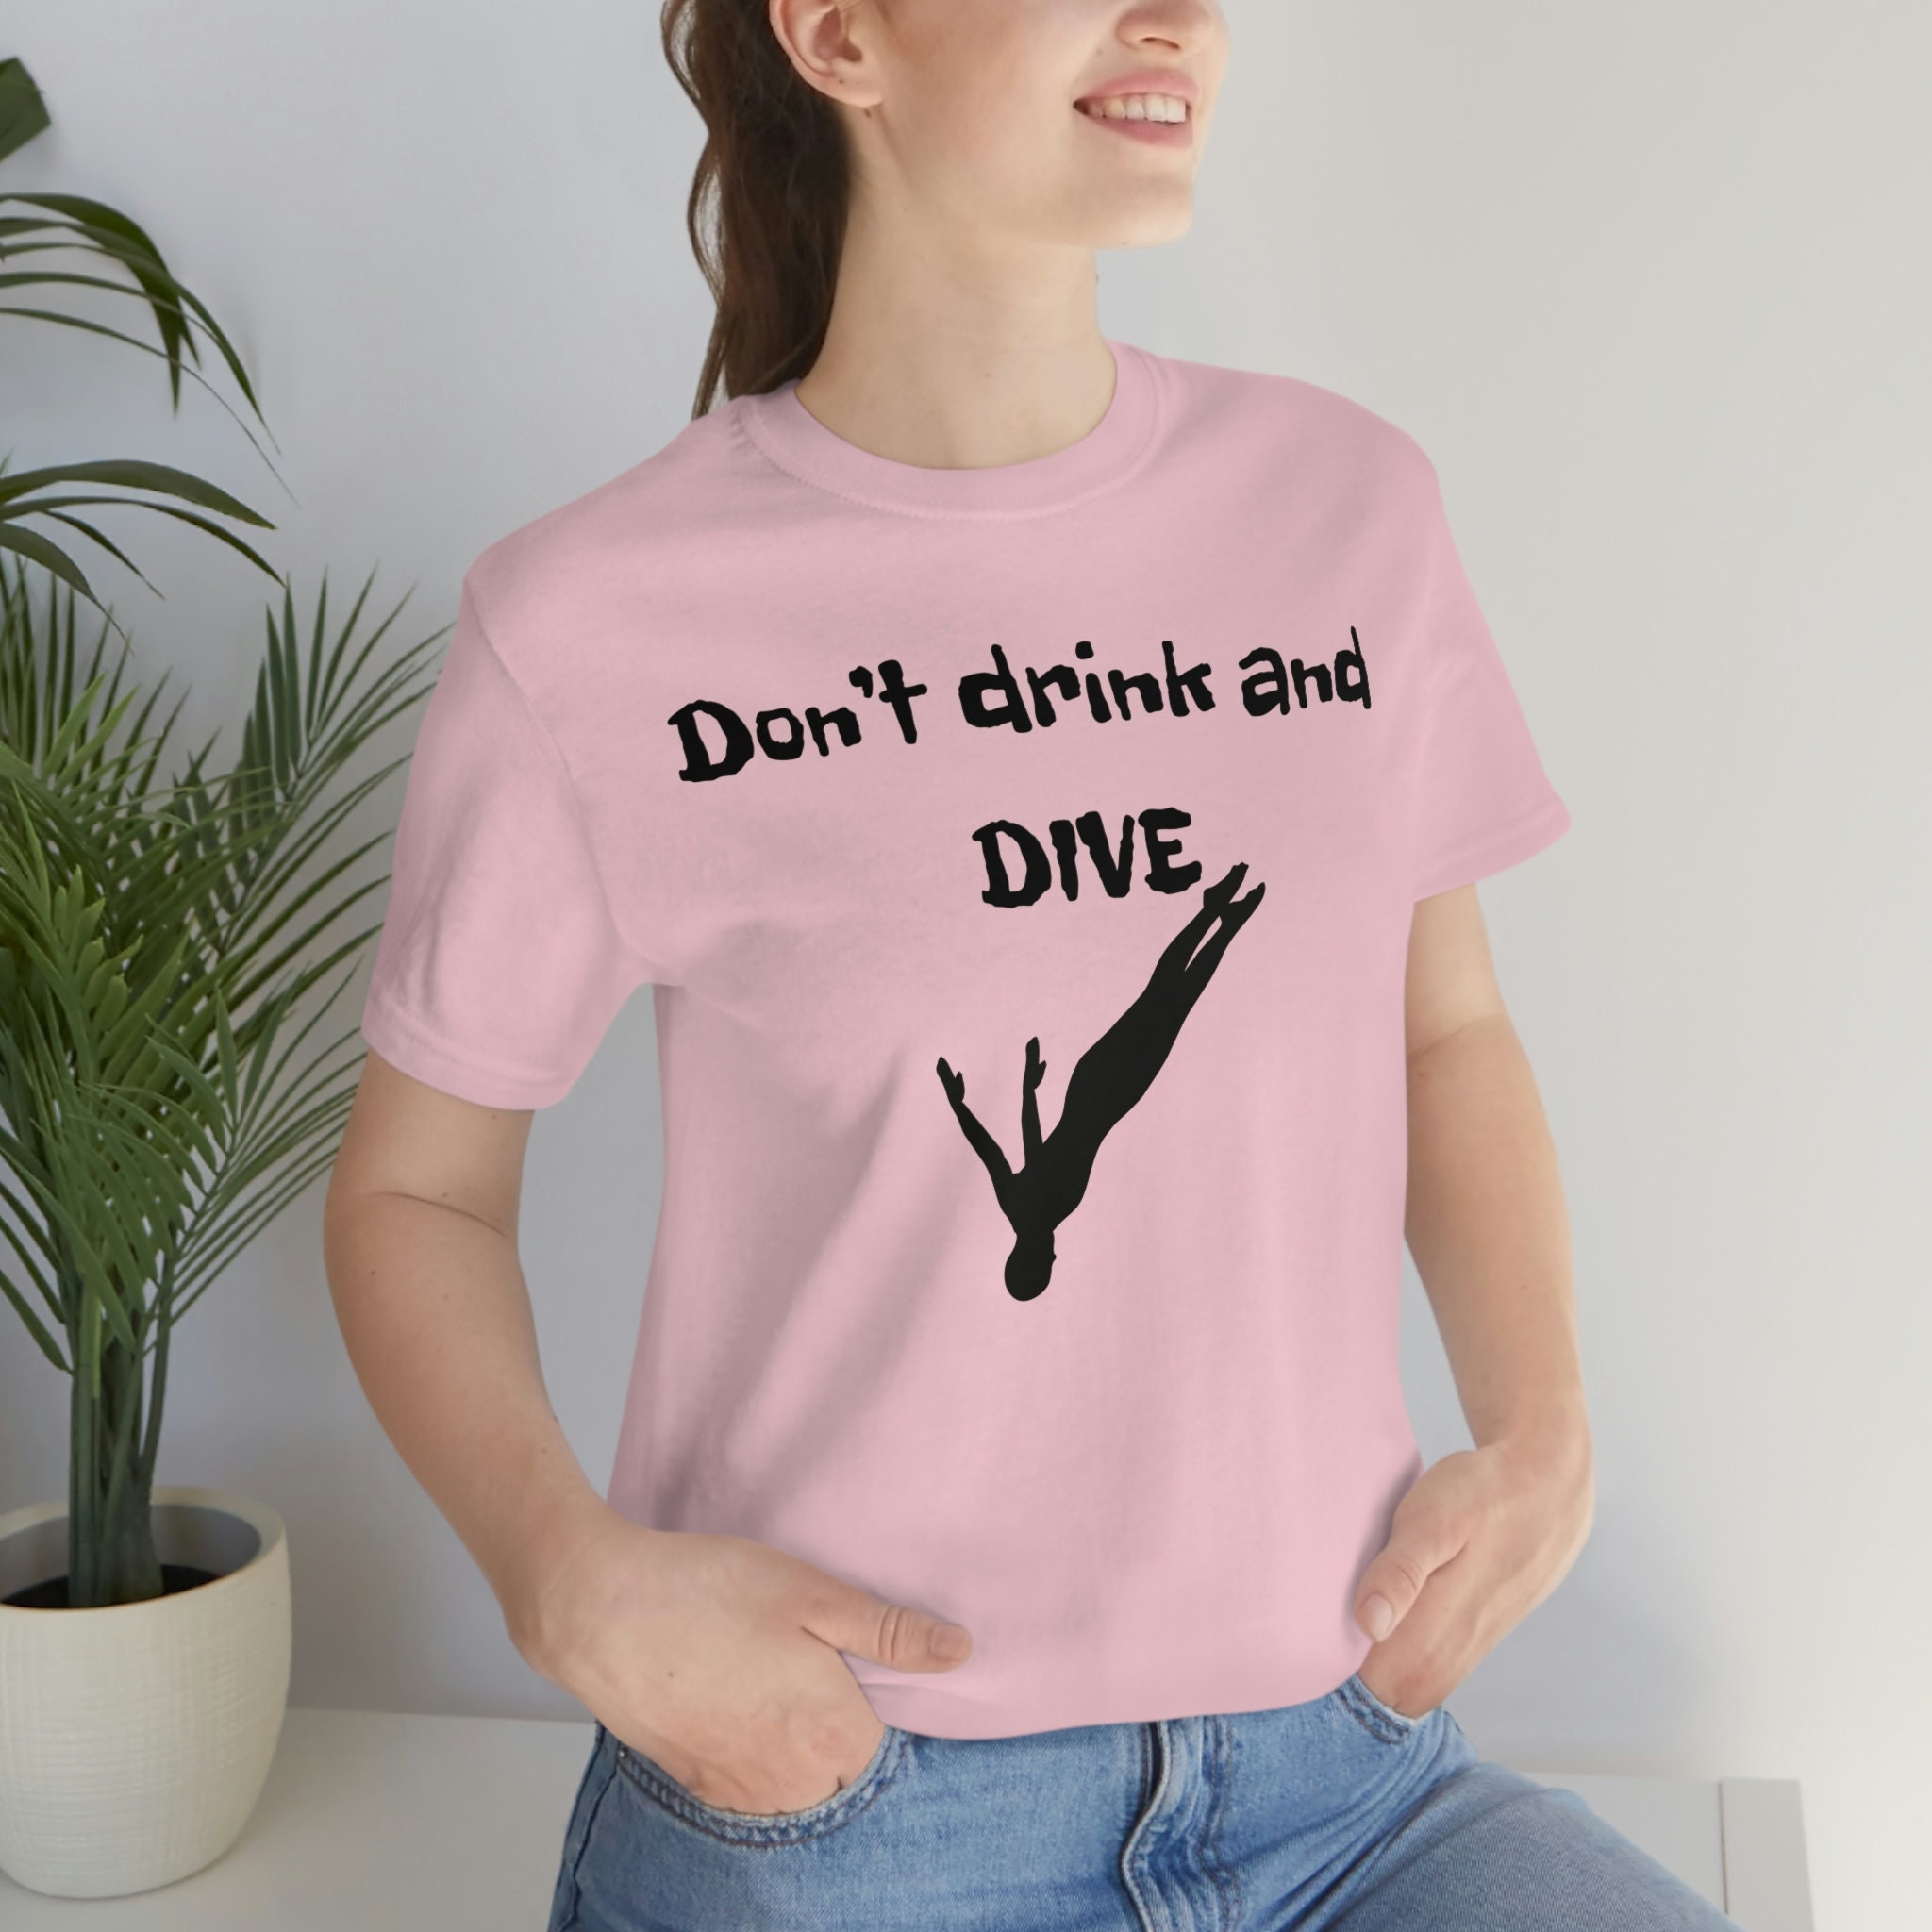 Do Not Drink and Dive, High Quality Bella Canvas Unisex Jersey